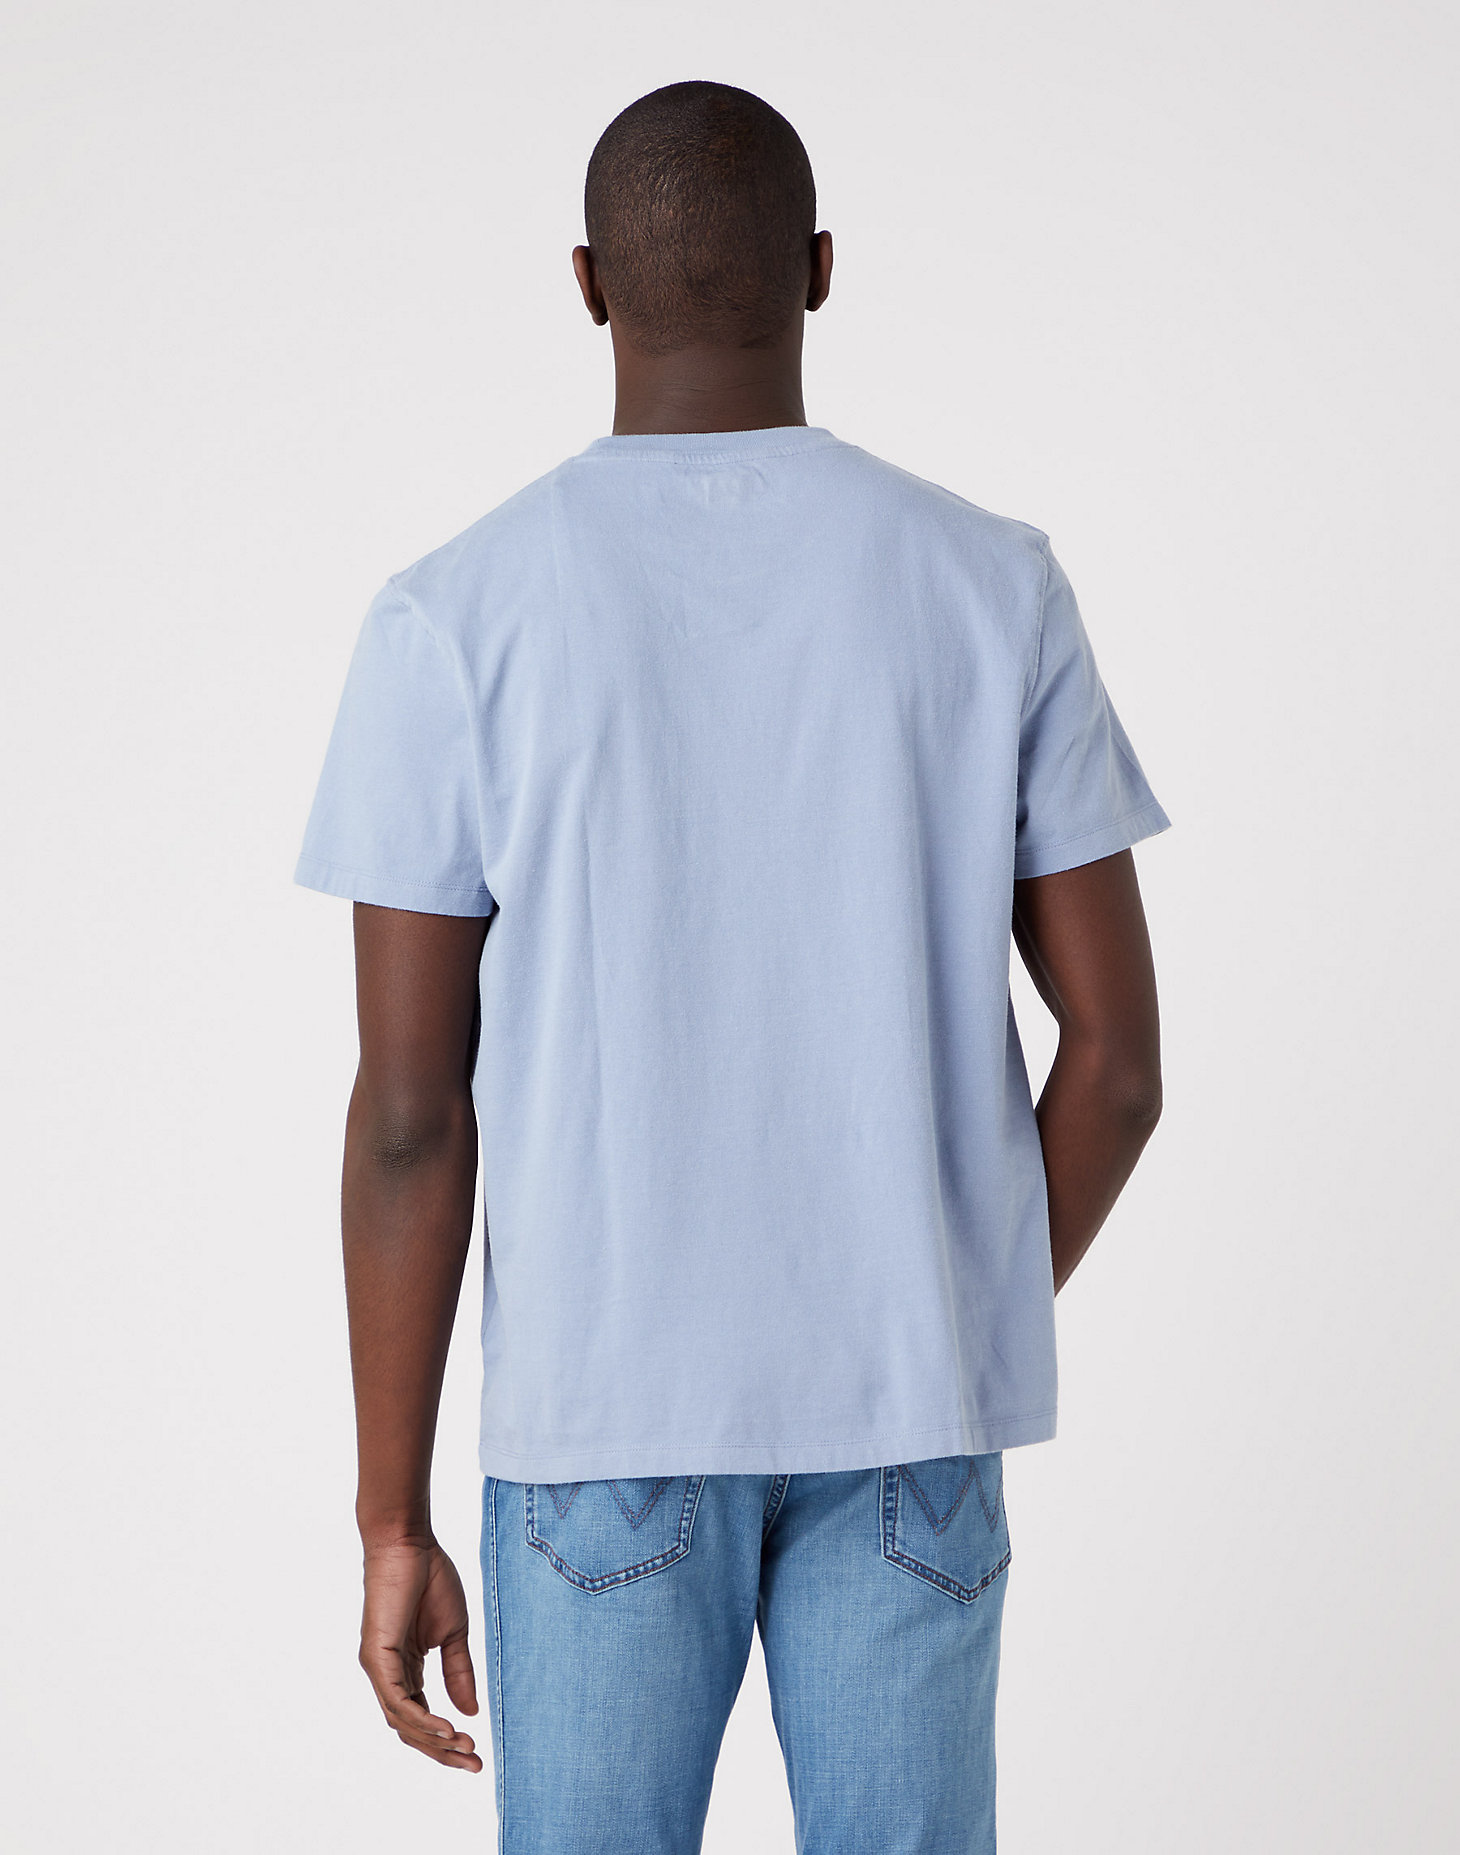 Eagle Tee in Stone Wash Blue alternative view 2